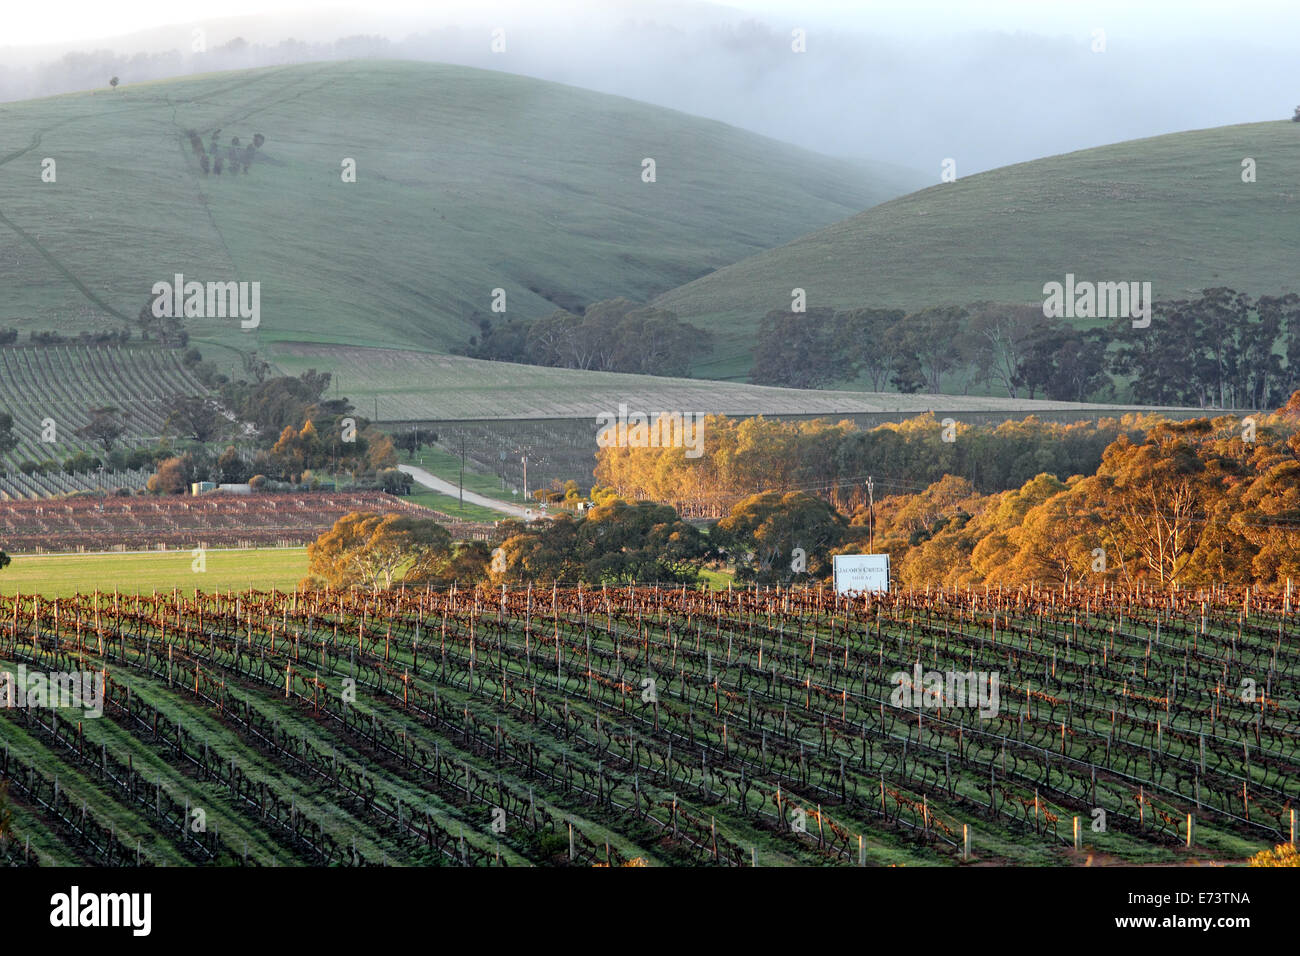 Rows of vineyards in the shadow of rolling hills in the Barossa Valley in Australia Stock Photo